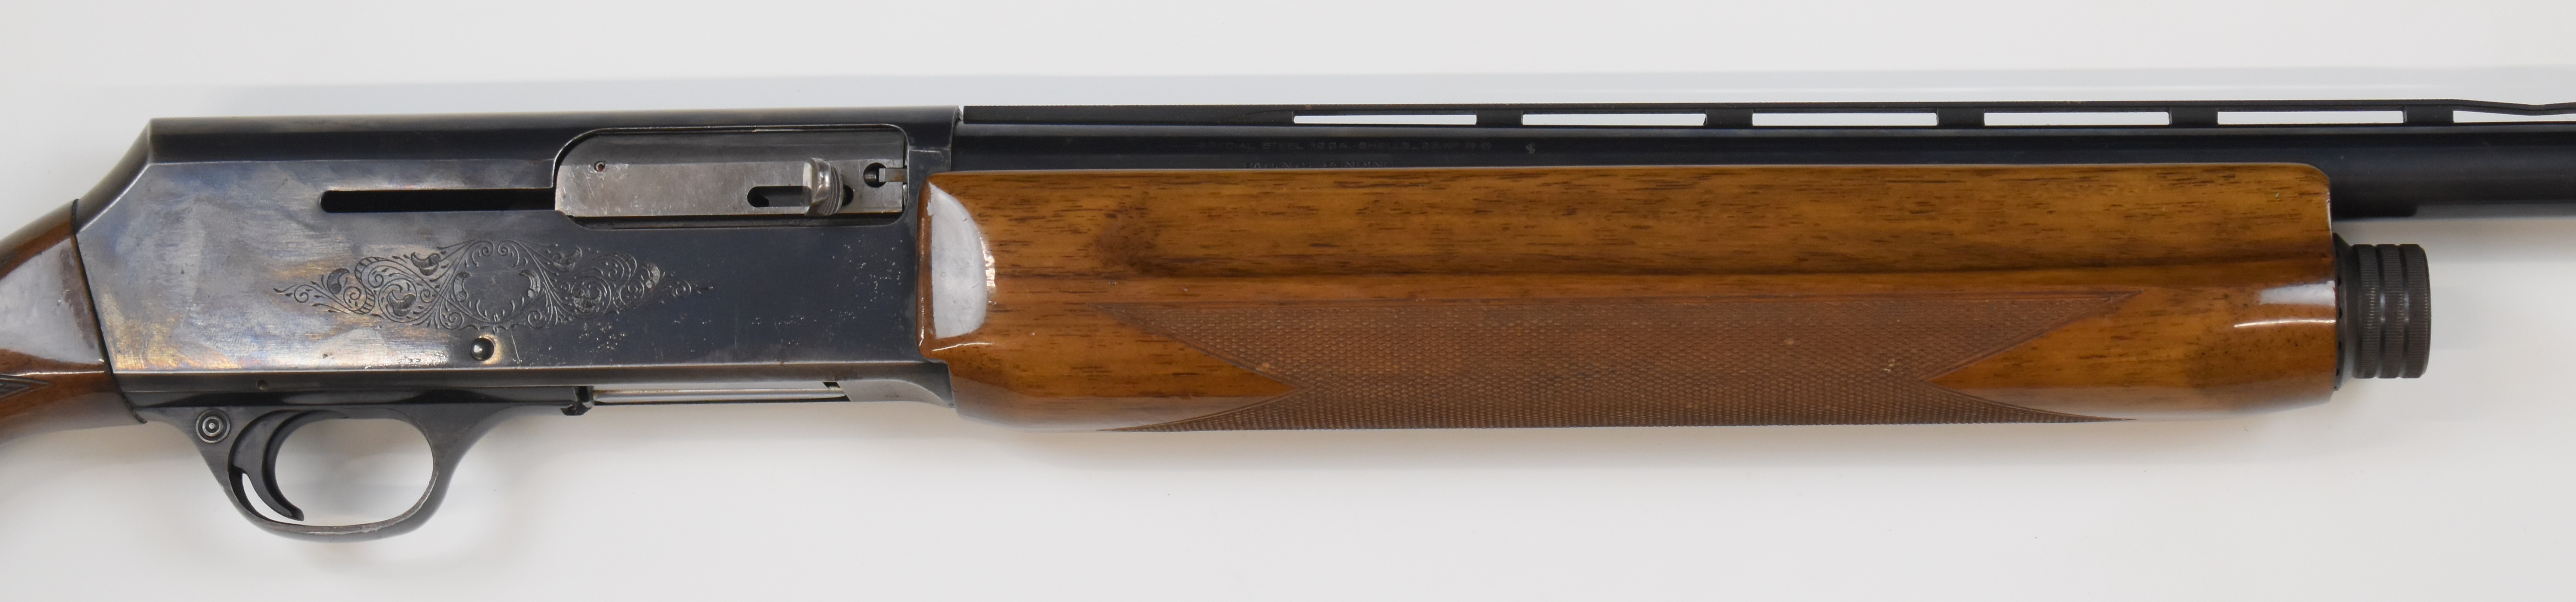 Browning 2000 12 bore 3-shot semi-automatic shotgun with named and engraved lock, chequered semi- - Image 4 of 11